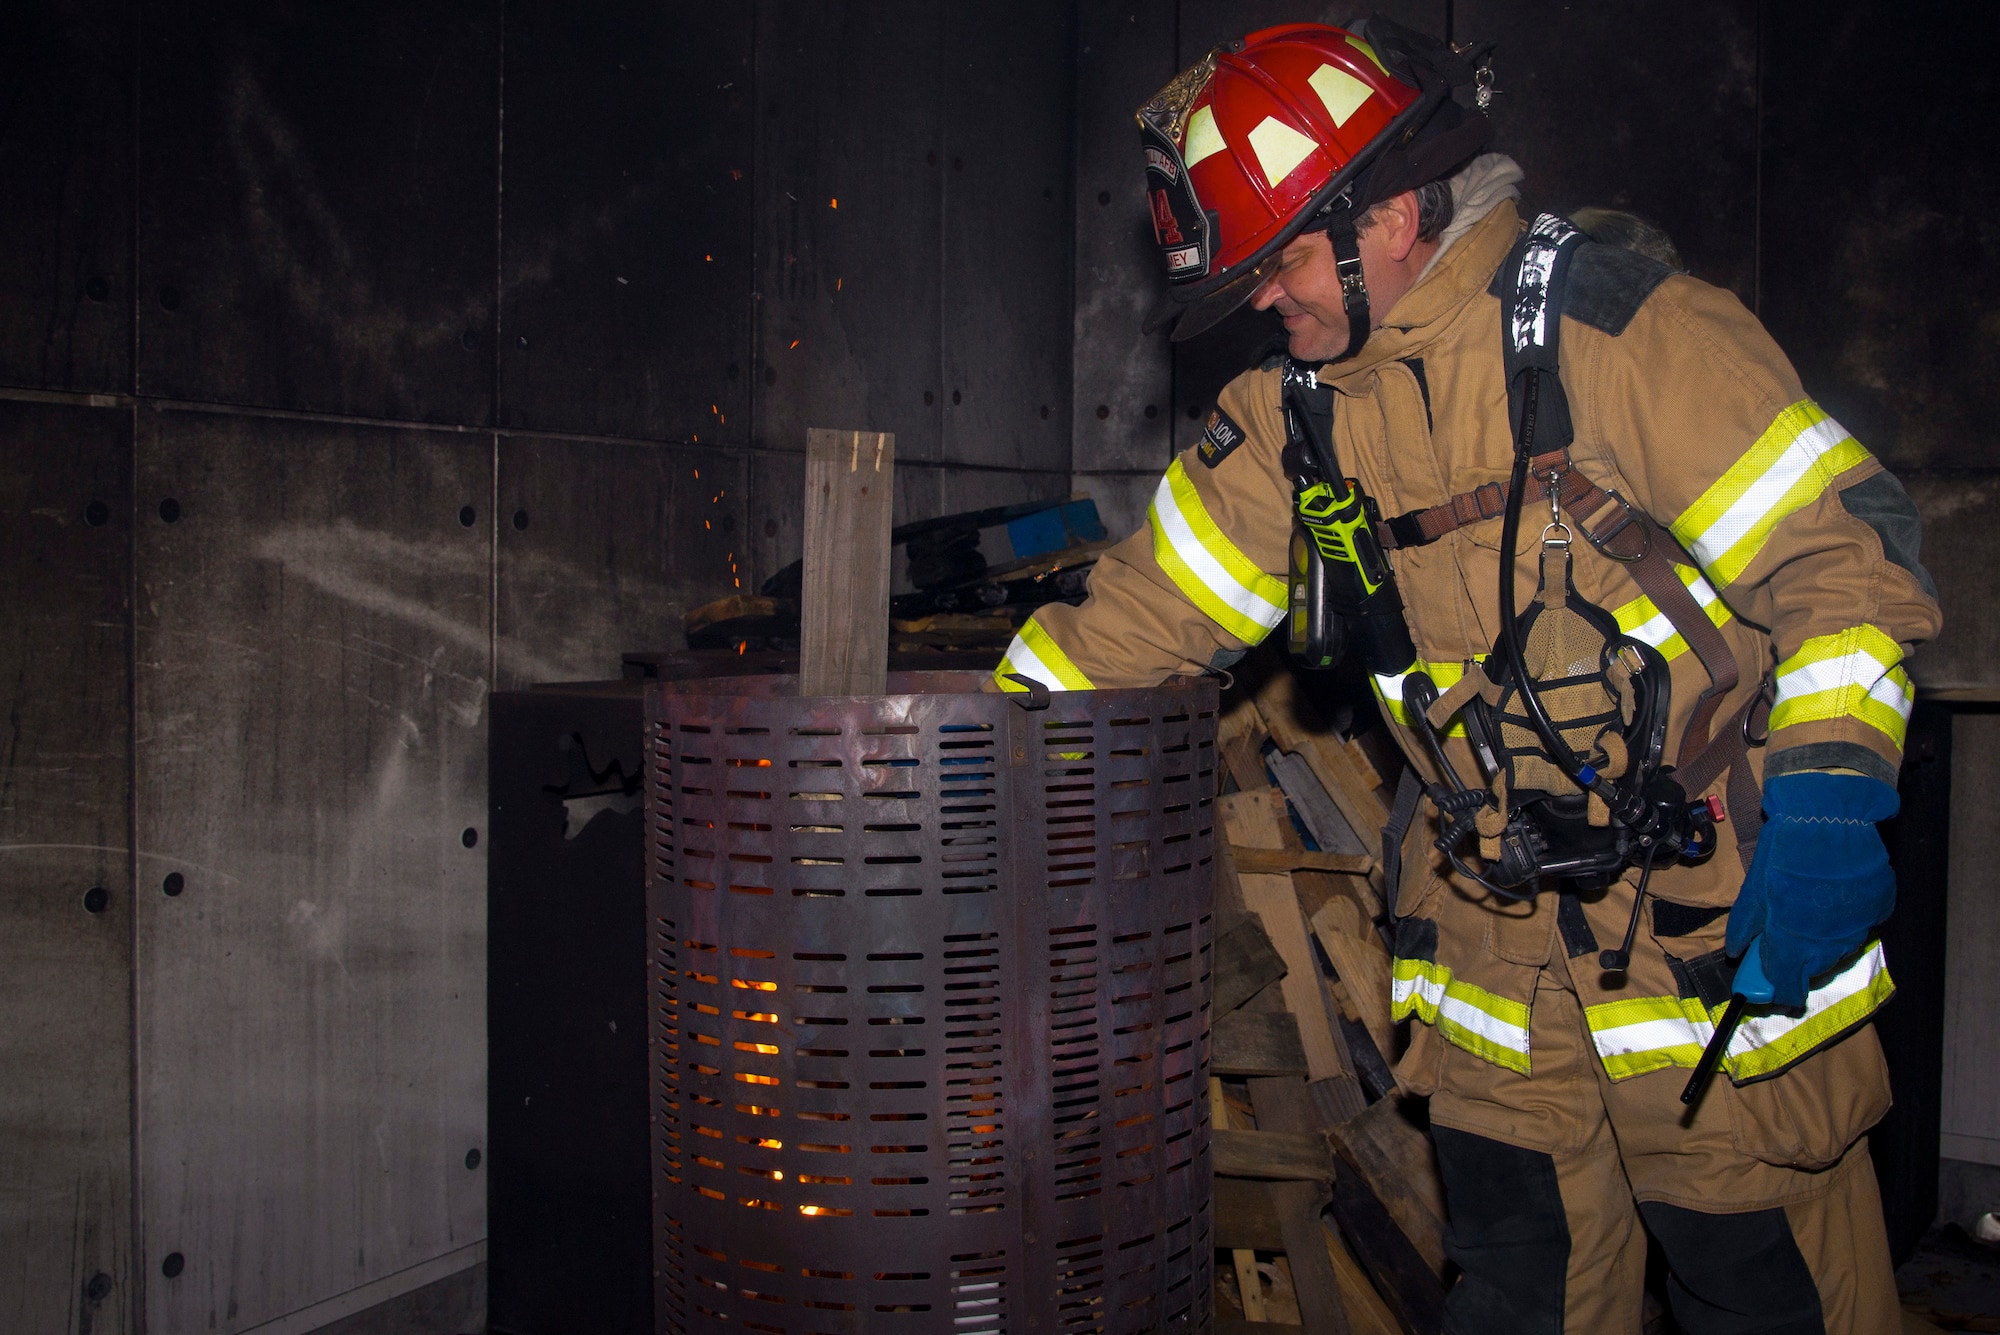 A 6th Civil Engineer Squadron firefighter starts a fire in a live-fire structural training facility during a joint firefighting training exercise with Airmen from the 153rd Airlift Wing at MacDill Air Force Base, Fla., March 5, 2019.